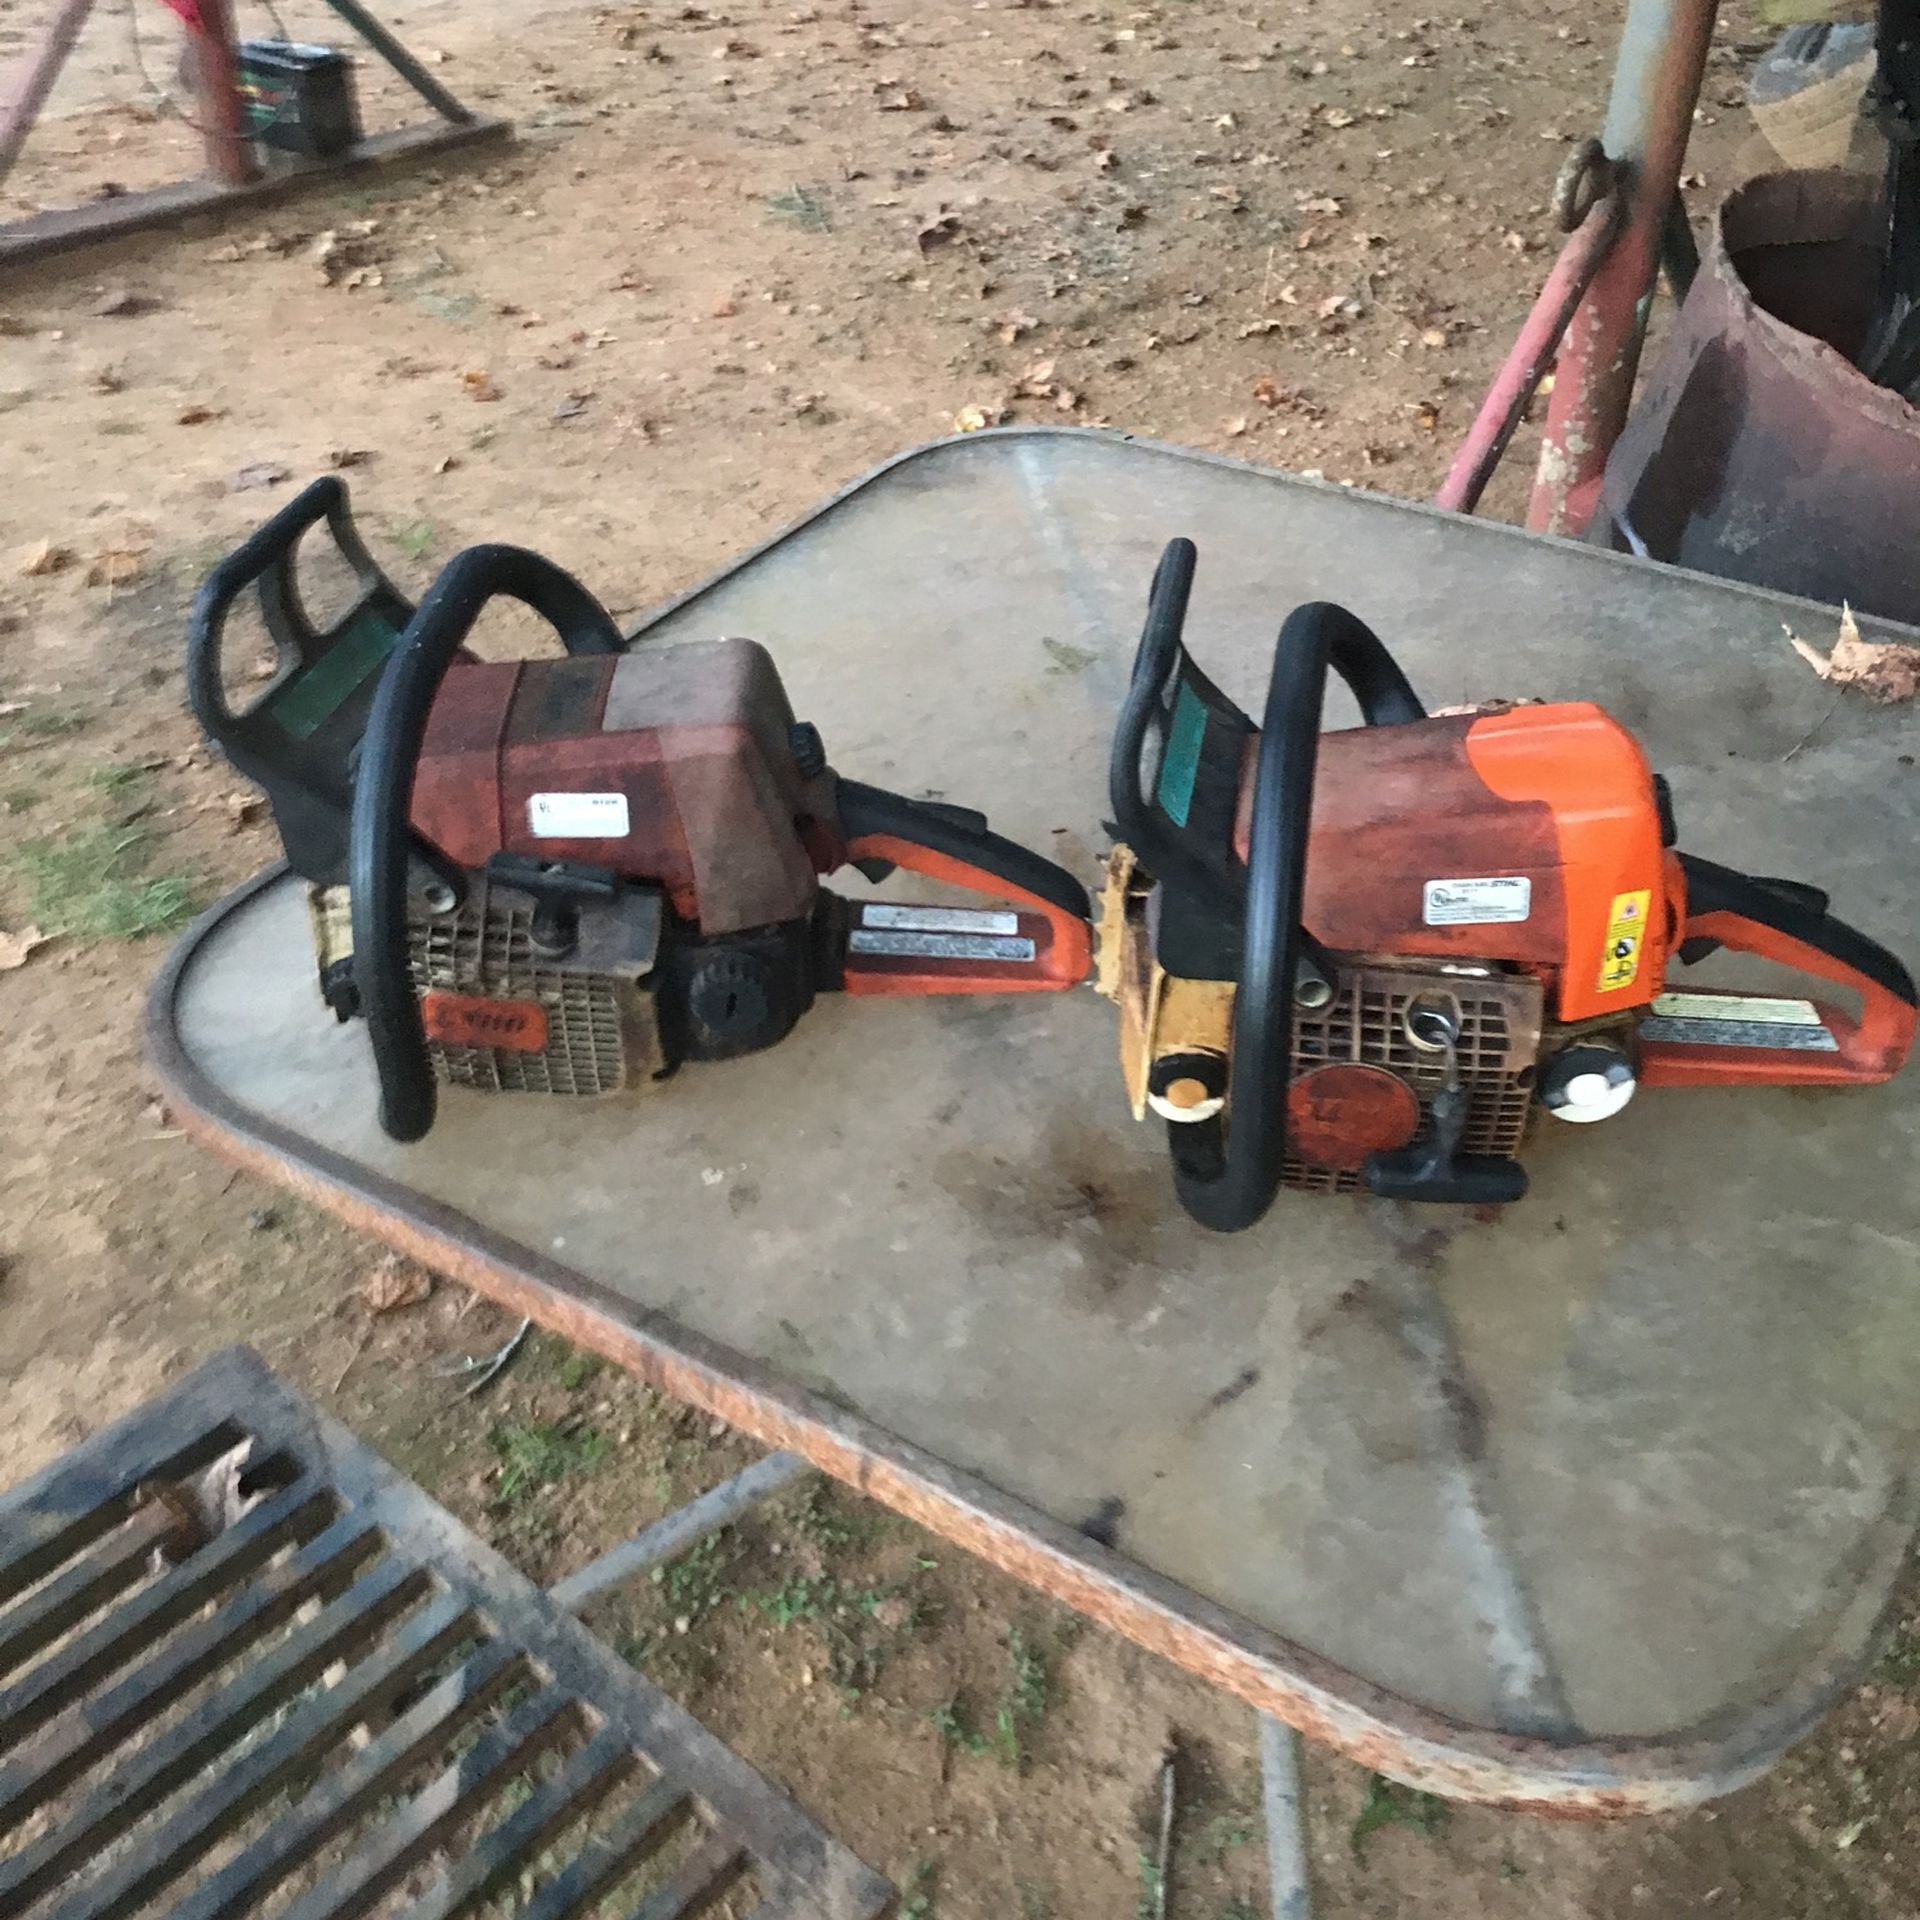 Shihl Chainsaw 025 And Ms250 80 Each Need Bar And Chain